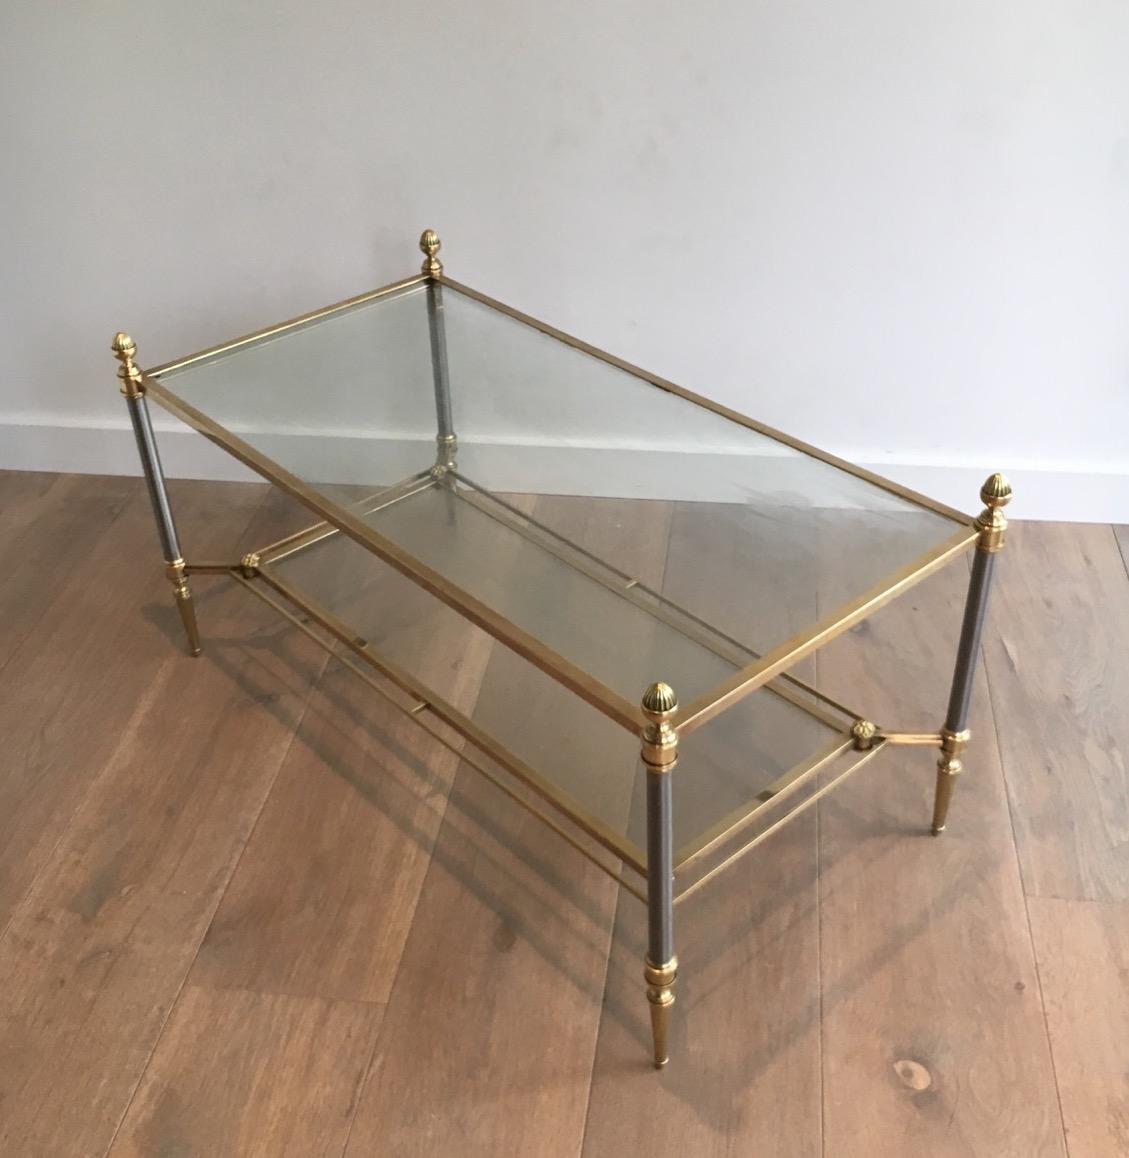 This very nice and elegant neoclassical style coffee table is made of brushed steel and brass with two glass shelves. This is a French work by Maison Jansen. Circa 1940